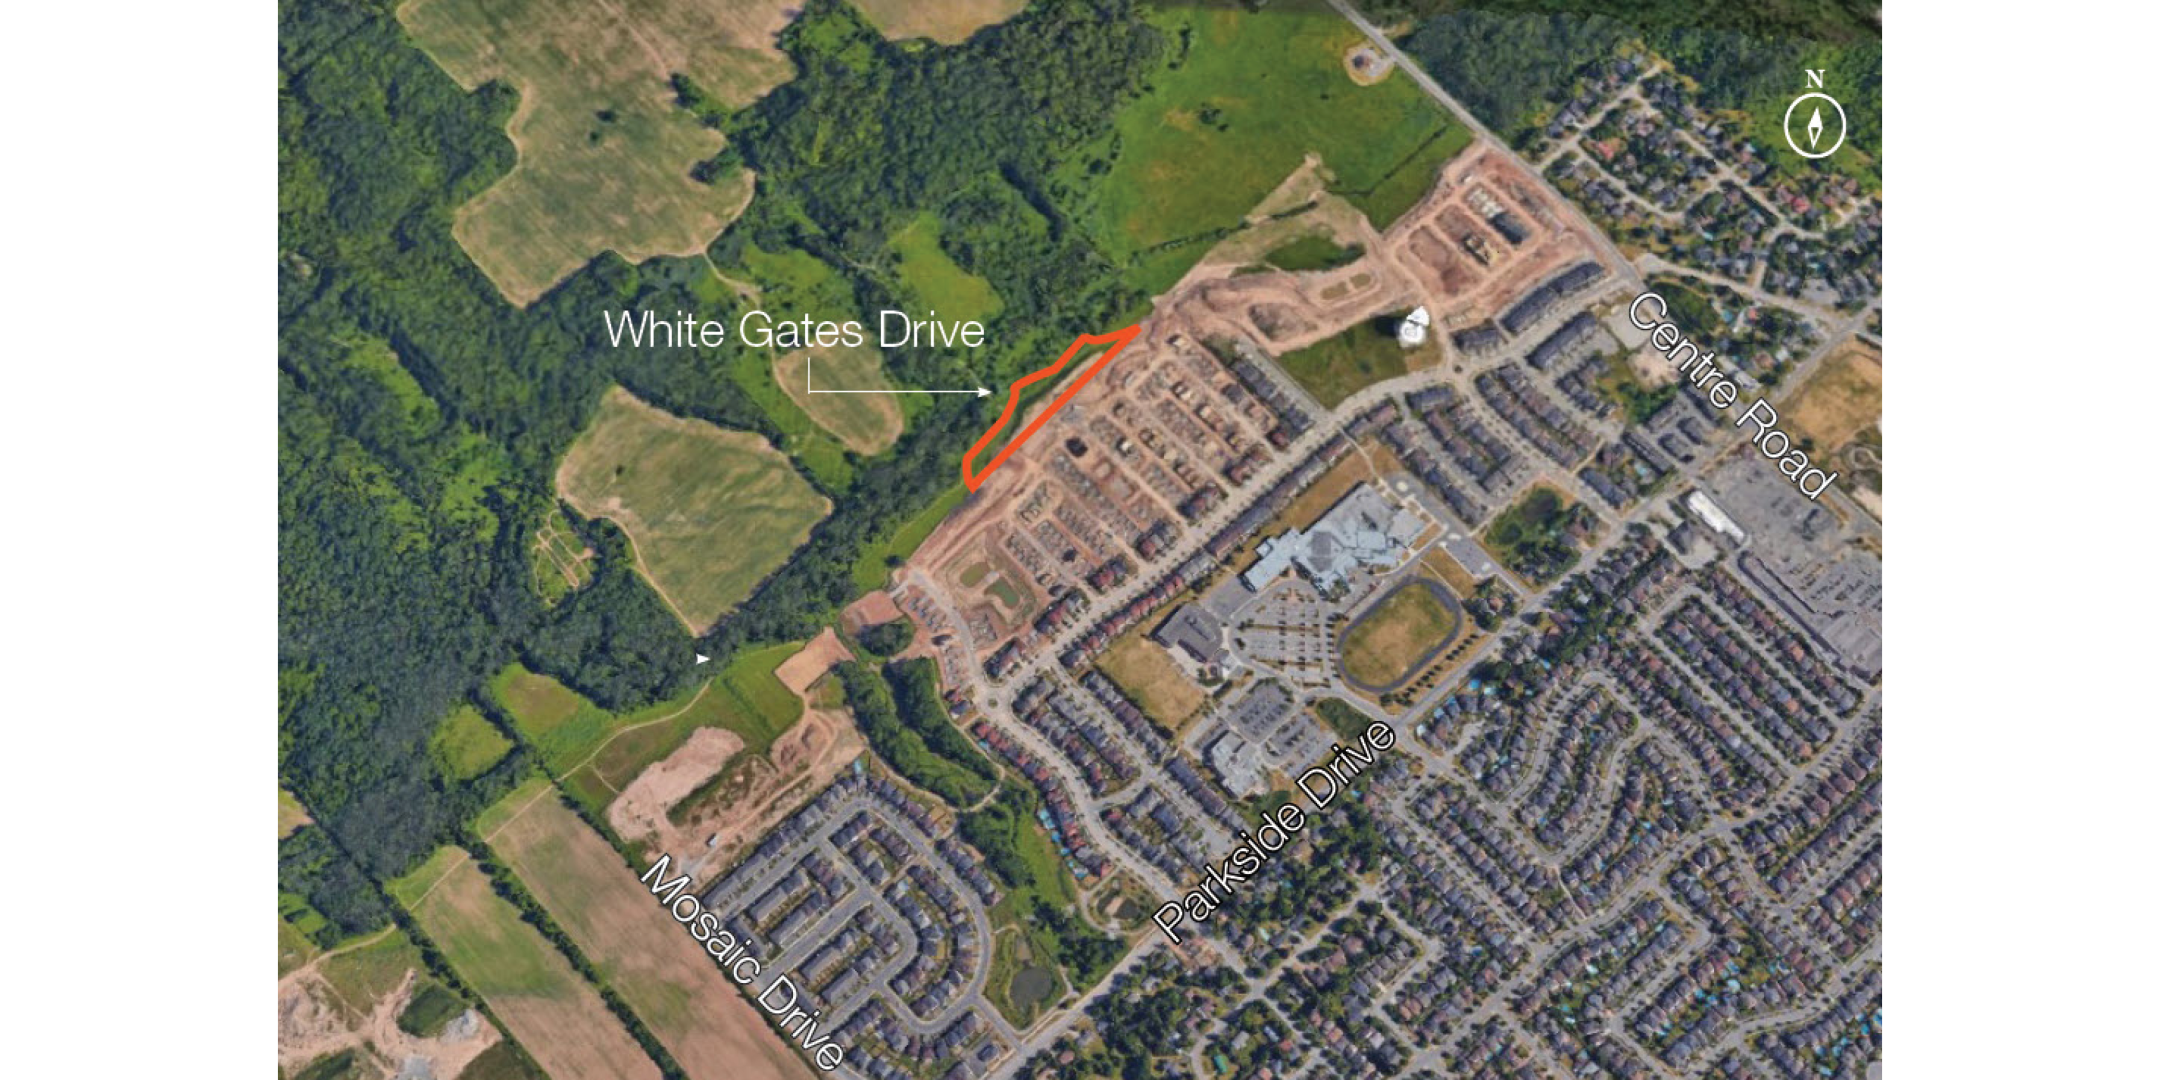 Aerial image of White Gates Drive